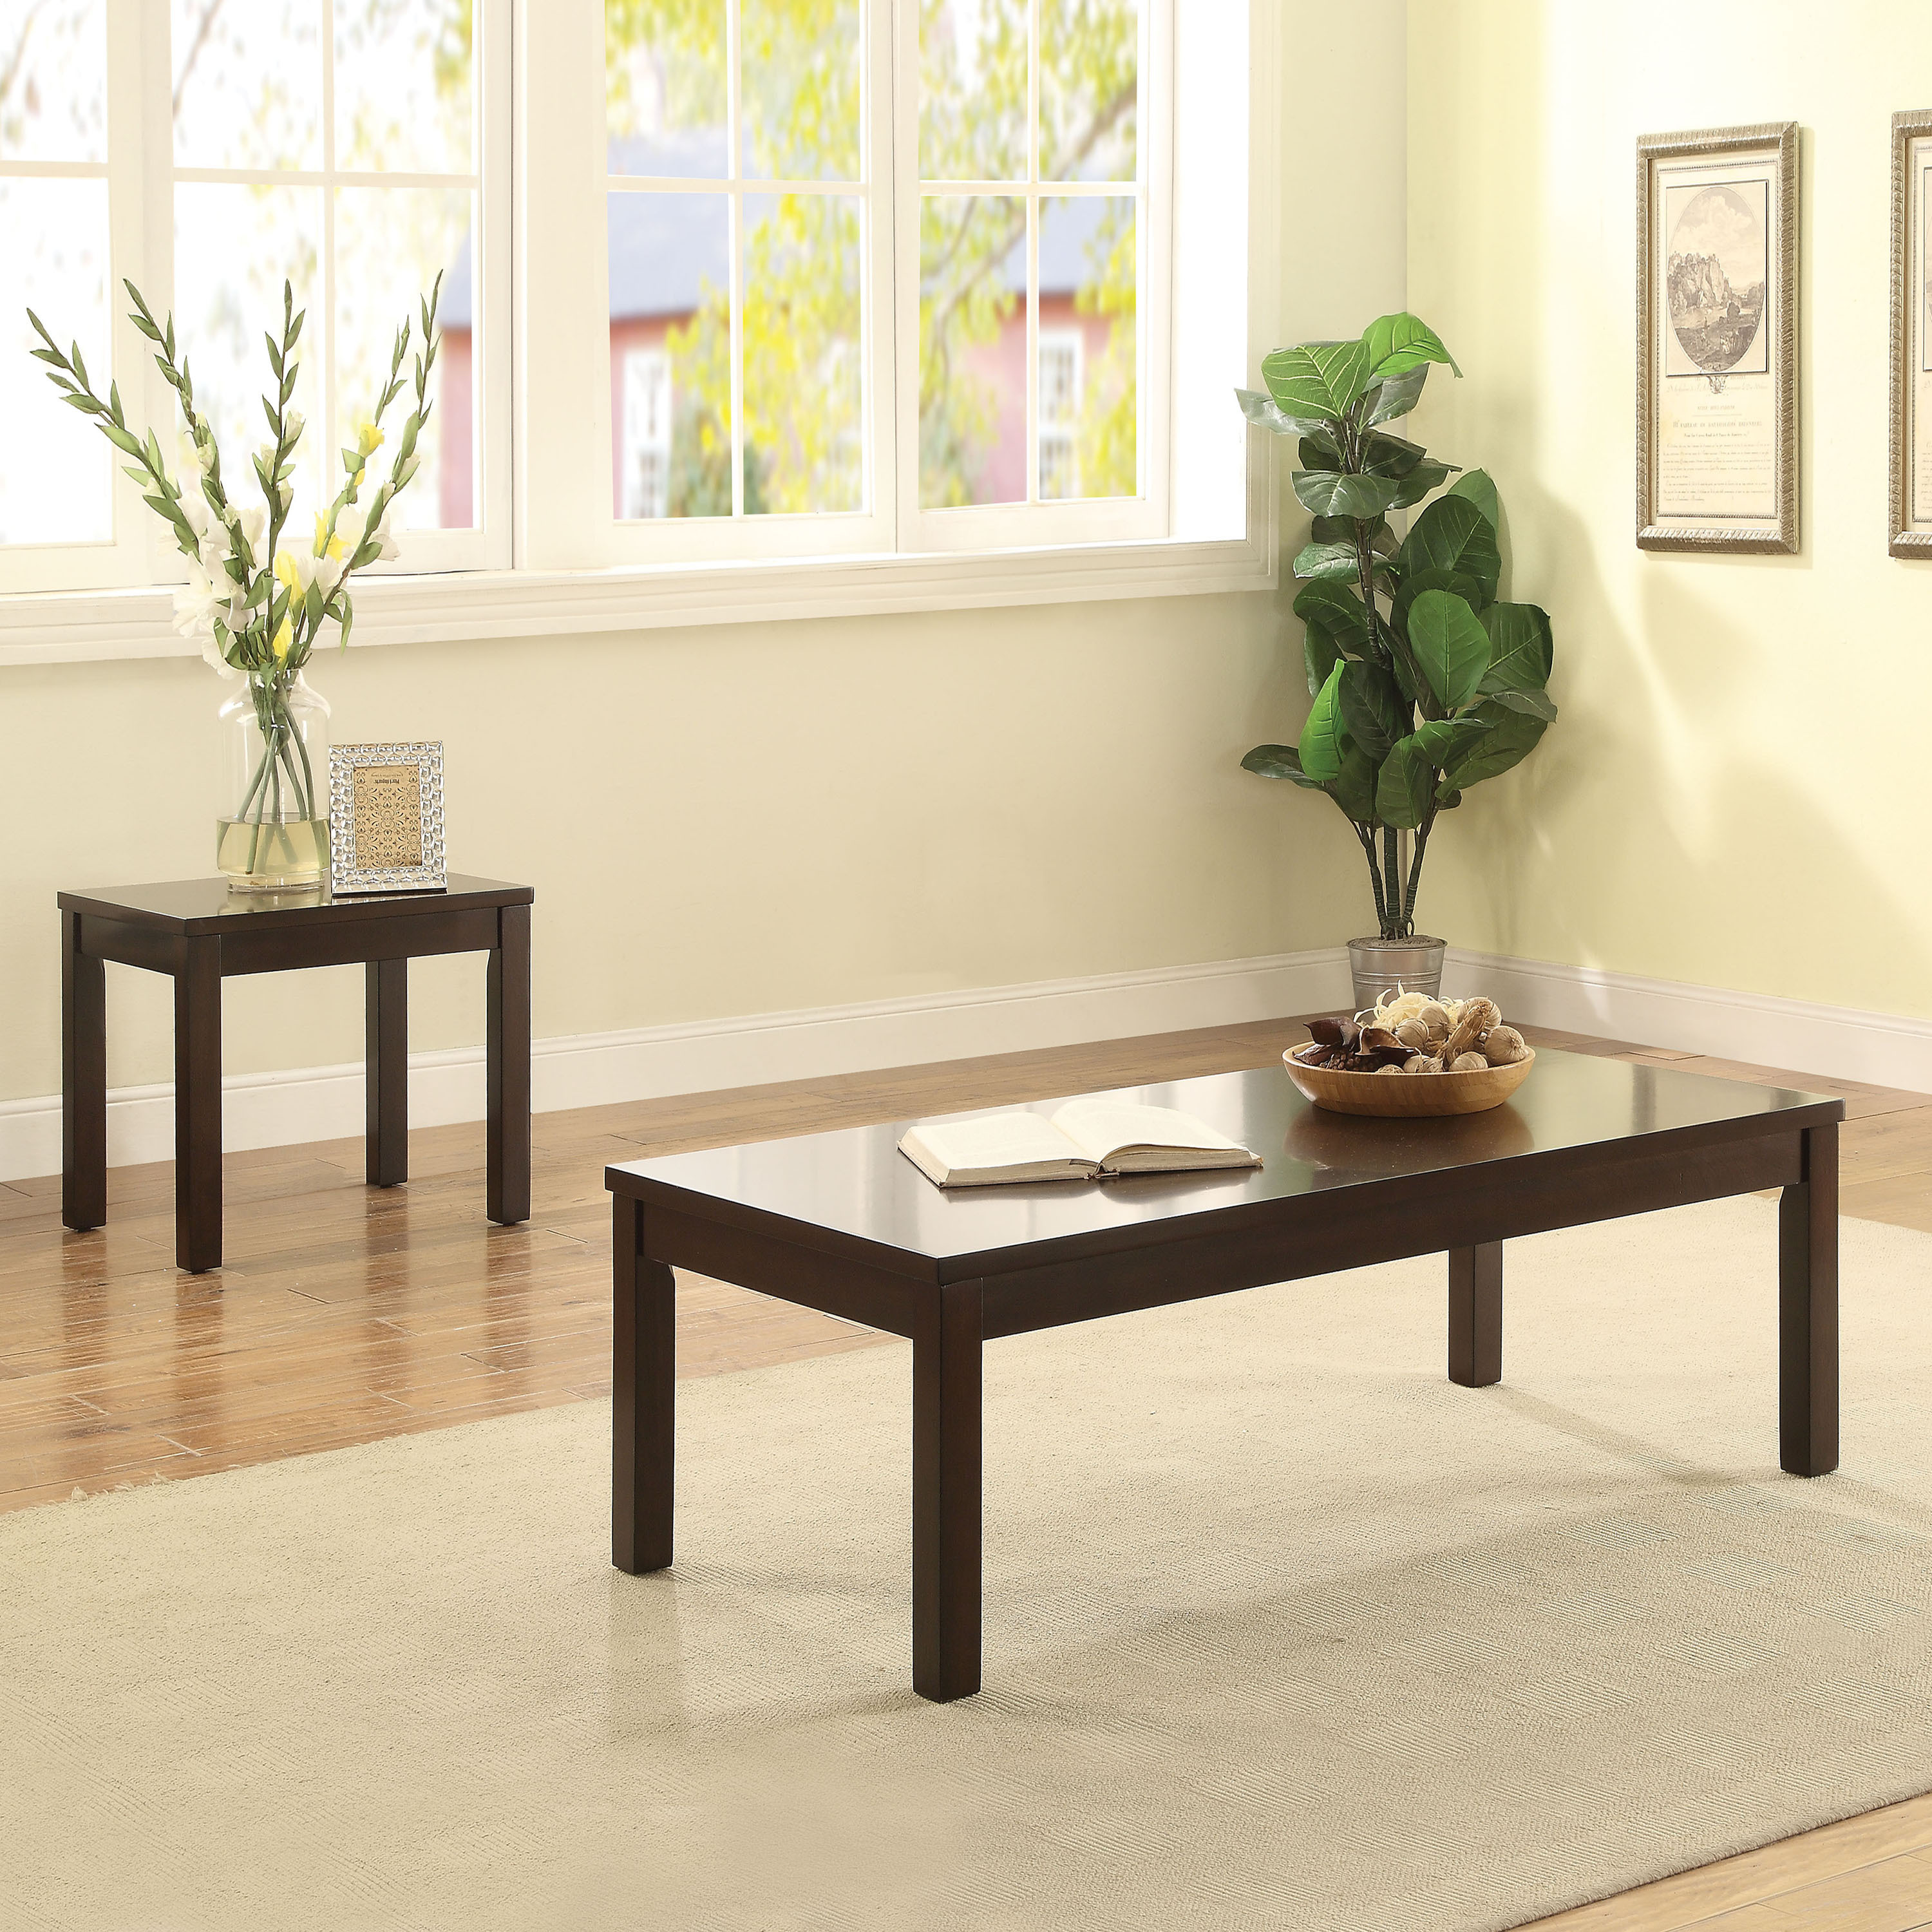 ACME Malak 3Pc Pack Coffee/End Table Set, Walnut-Finish:Walnut,Style:Contemporary/Casual - image 2 of 4